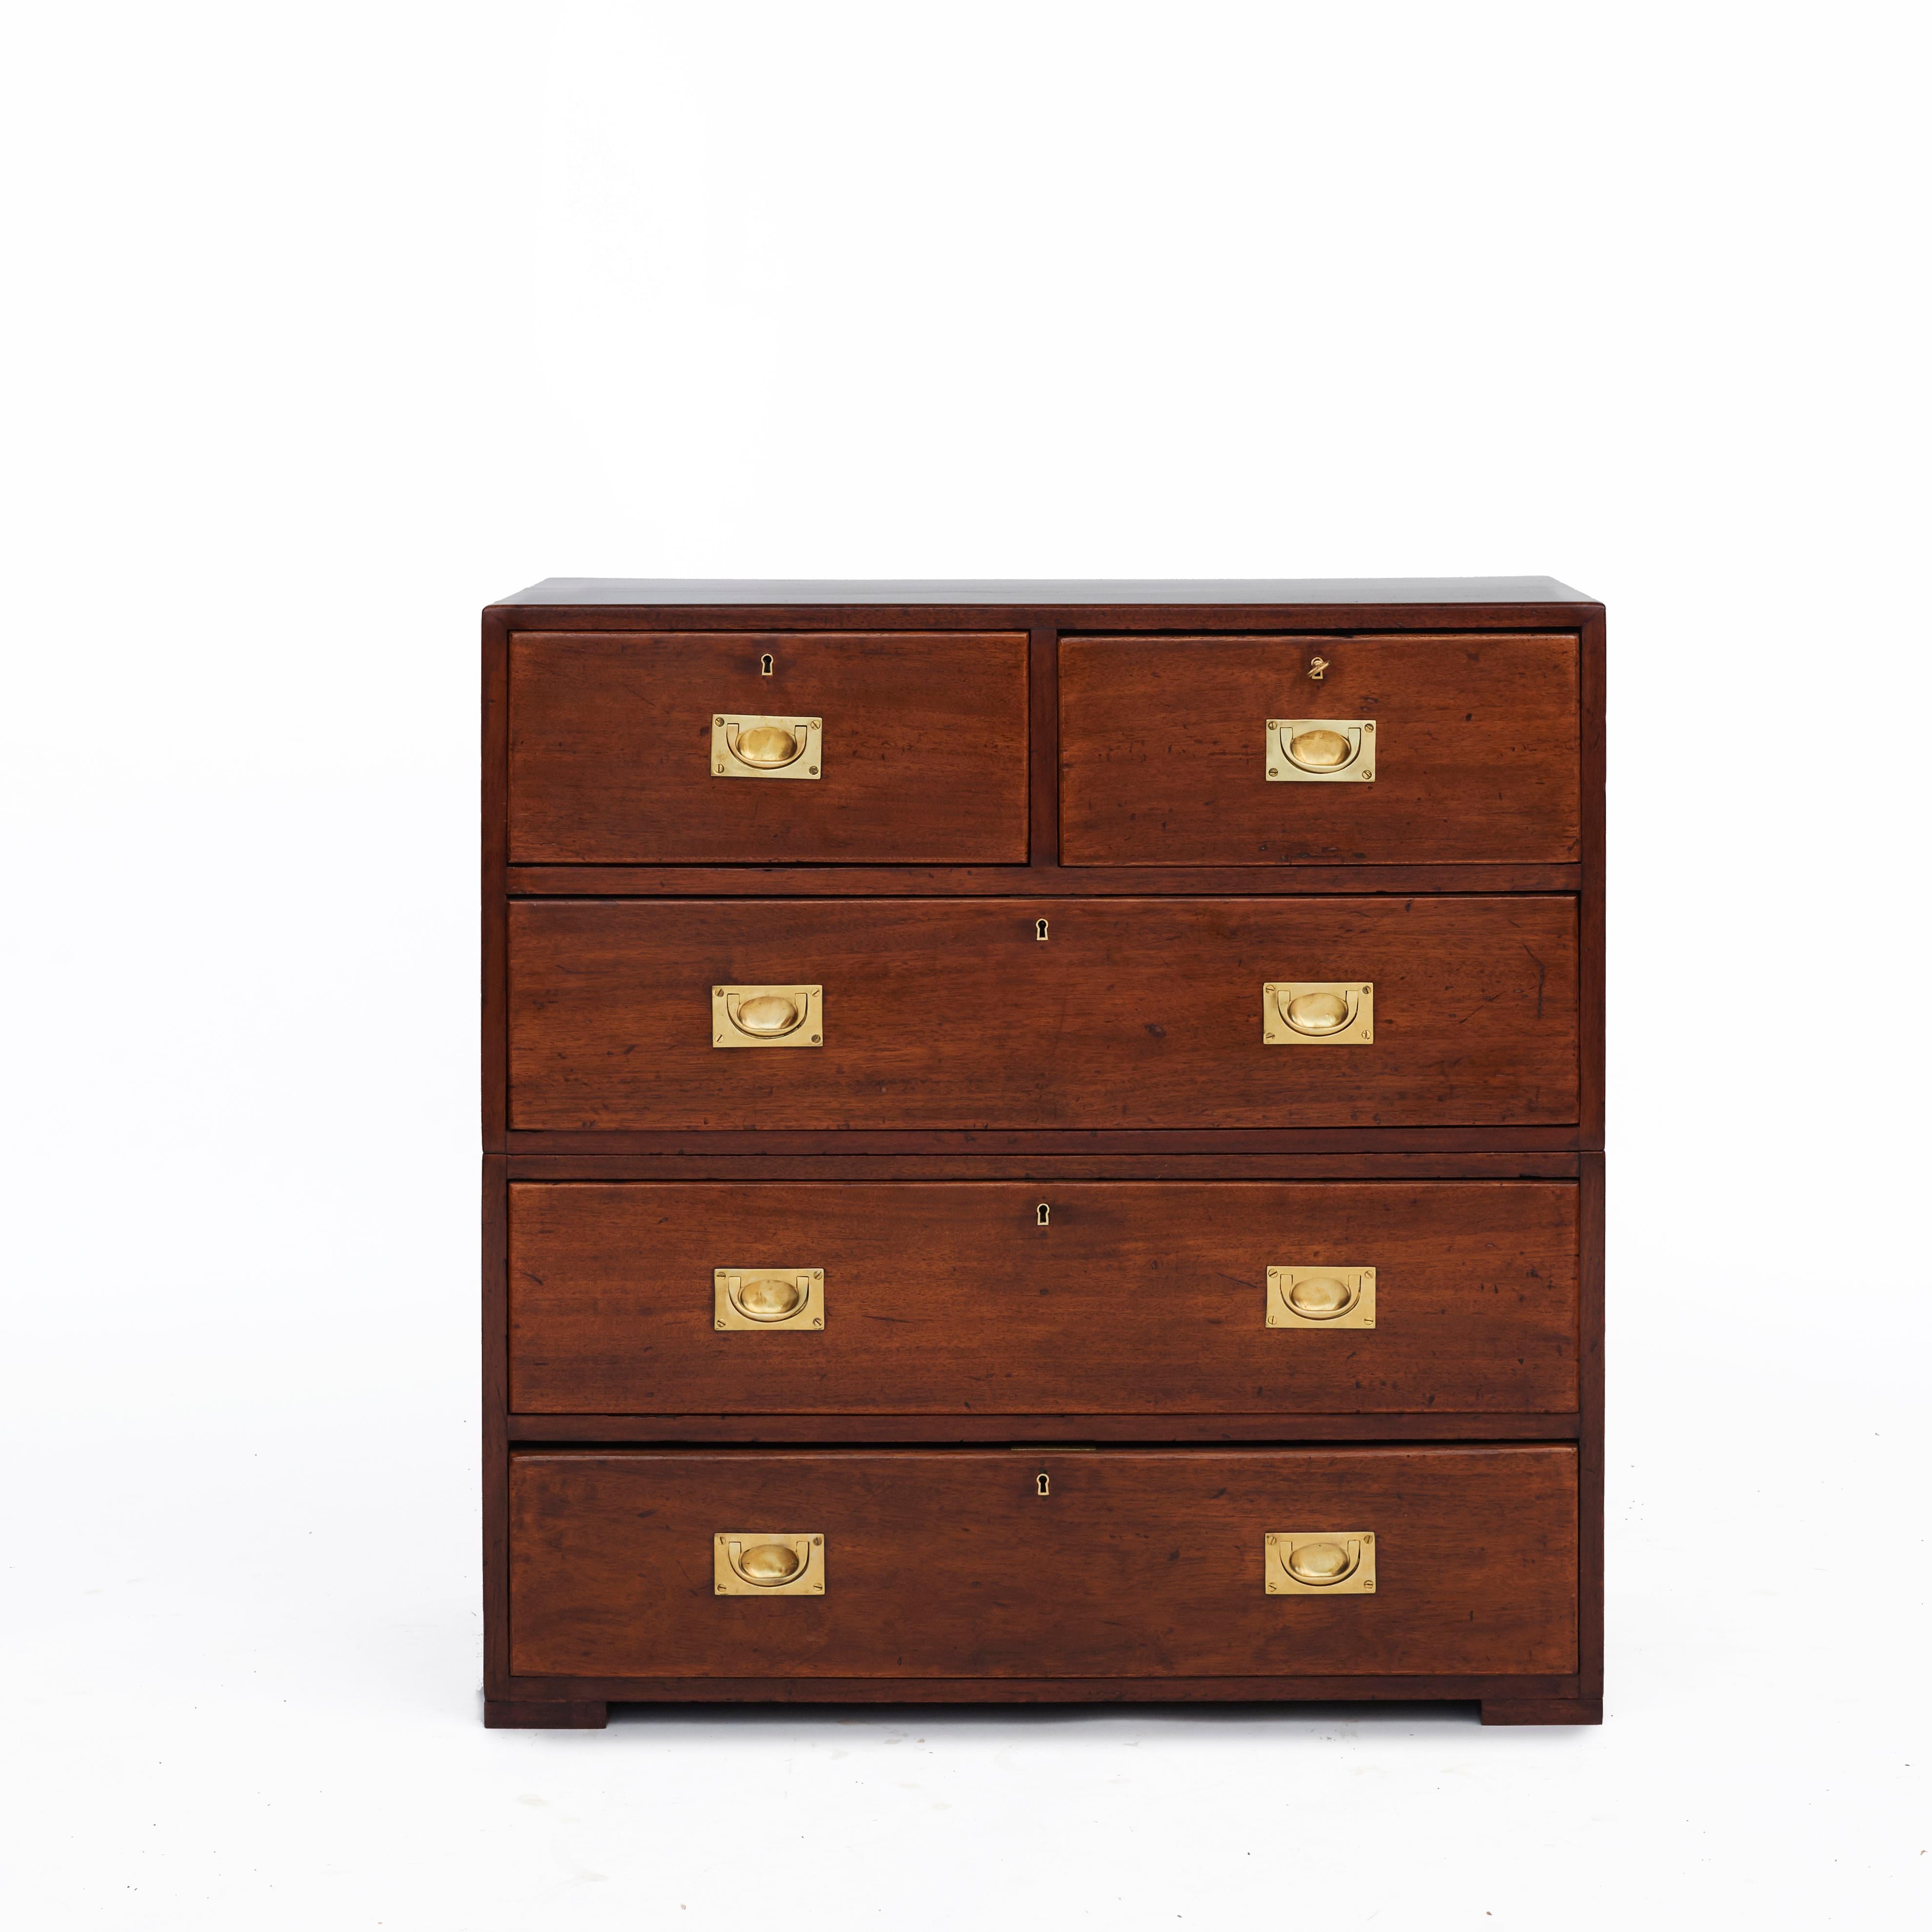 English military officer’s Campaign chest of drawers. Made solid mahogany with original brass fittings.
In two parts. Traditional formation with three over two drawers.
The locks on the two upper drawers have later been replaced with iron locks.